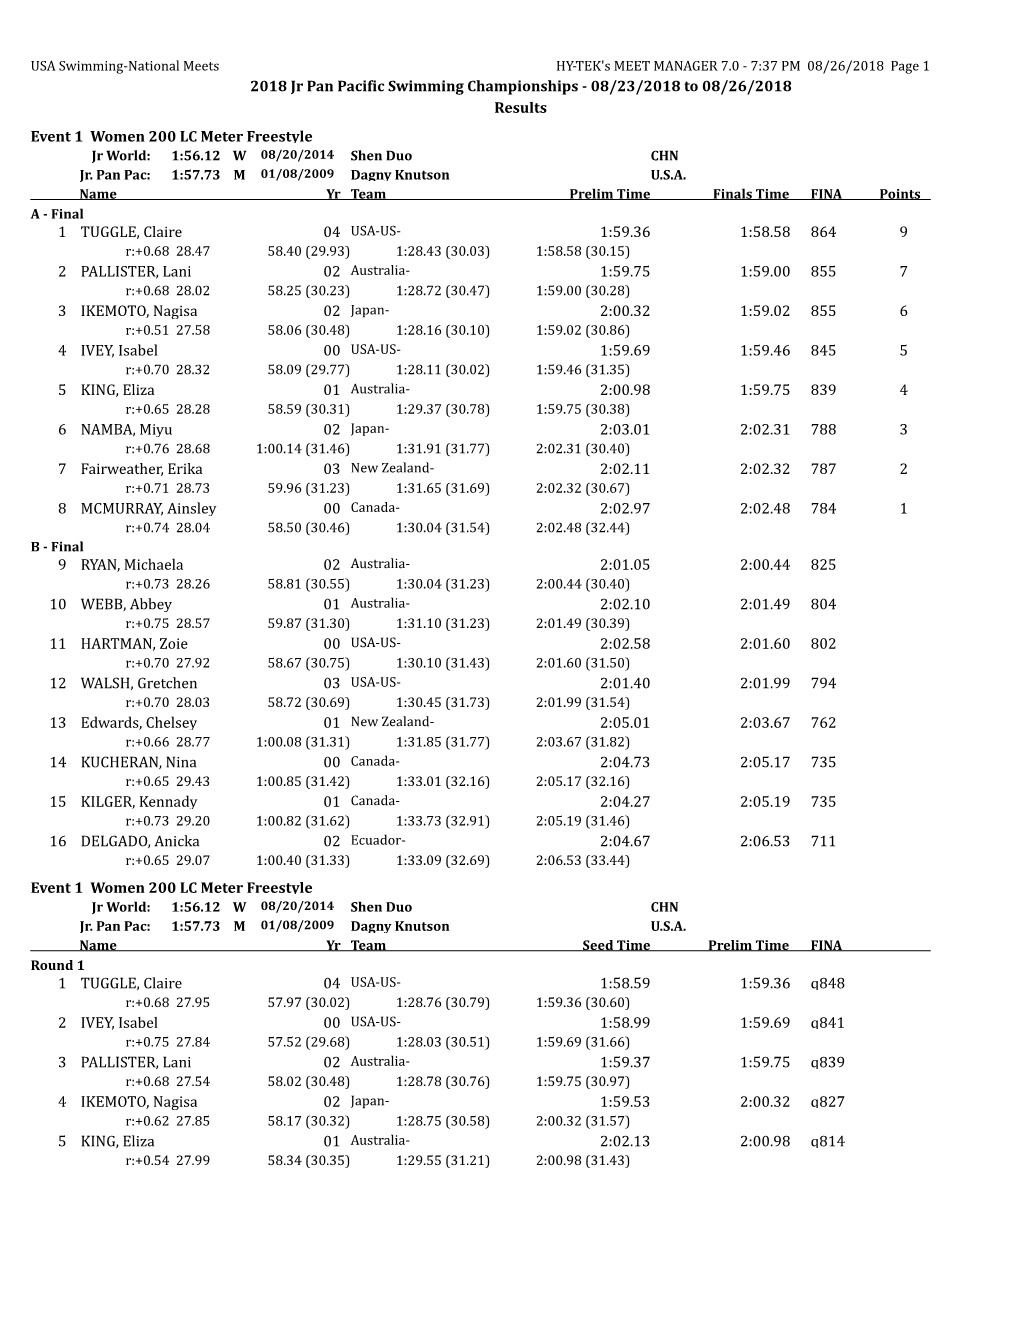 2018 Jr Pan Pacific Swimming Championships - 08/23/2018 to 08/26/2018 Results